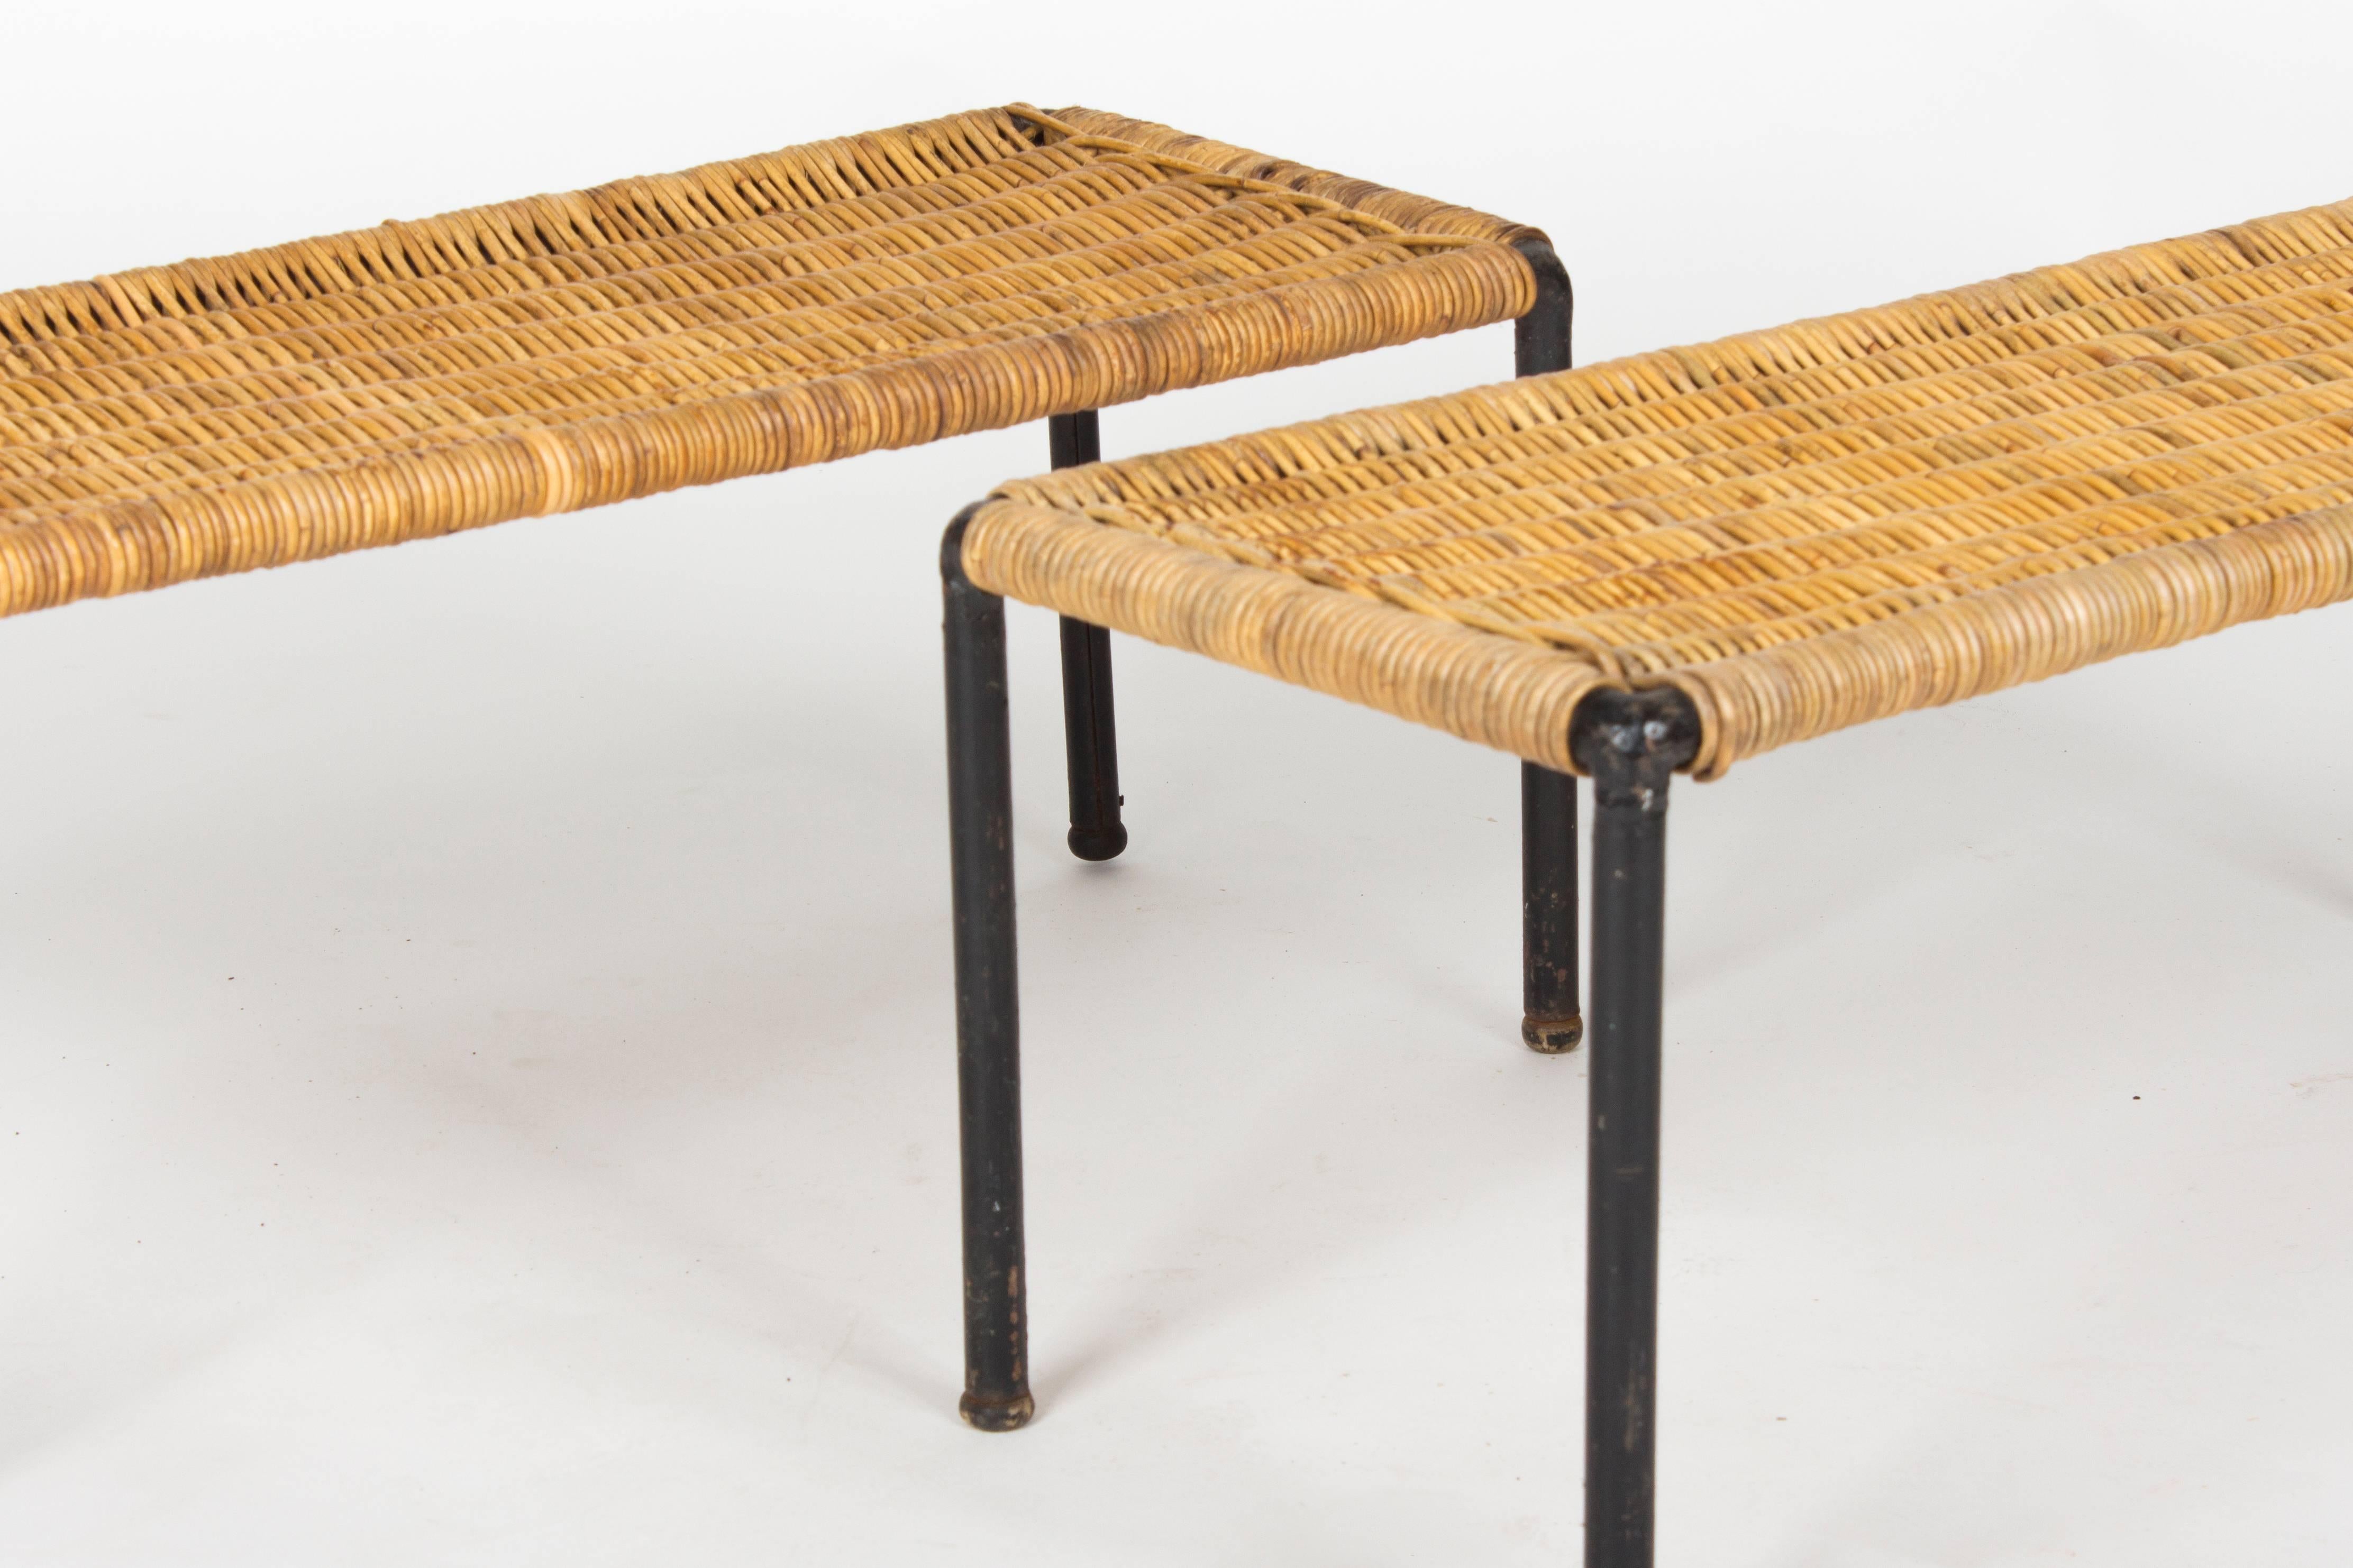 an authentic and rare set of two side tables by the Auböck workshop. Most probably designed and manufactured in the 1950s by Carl Auböck II. and his Vienna based production.

Of particular interest to collectors is the authentic patina and details